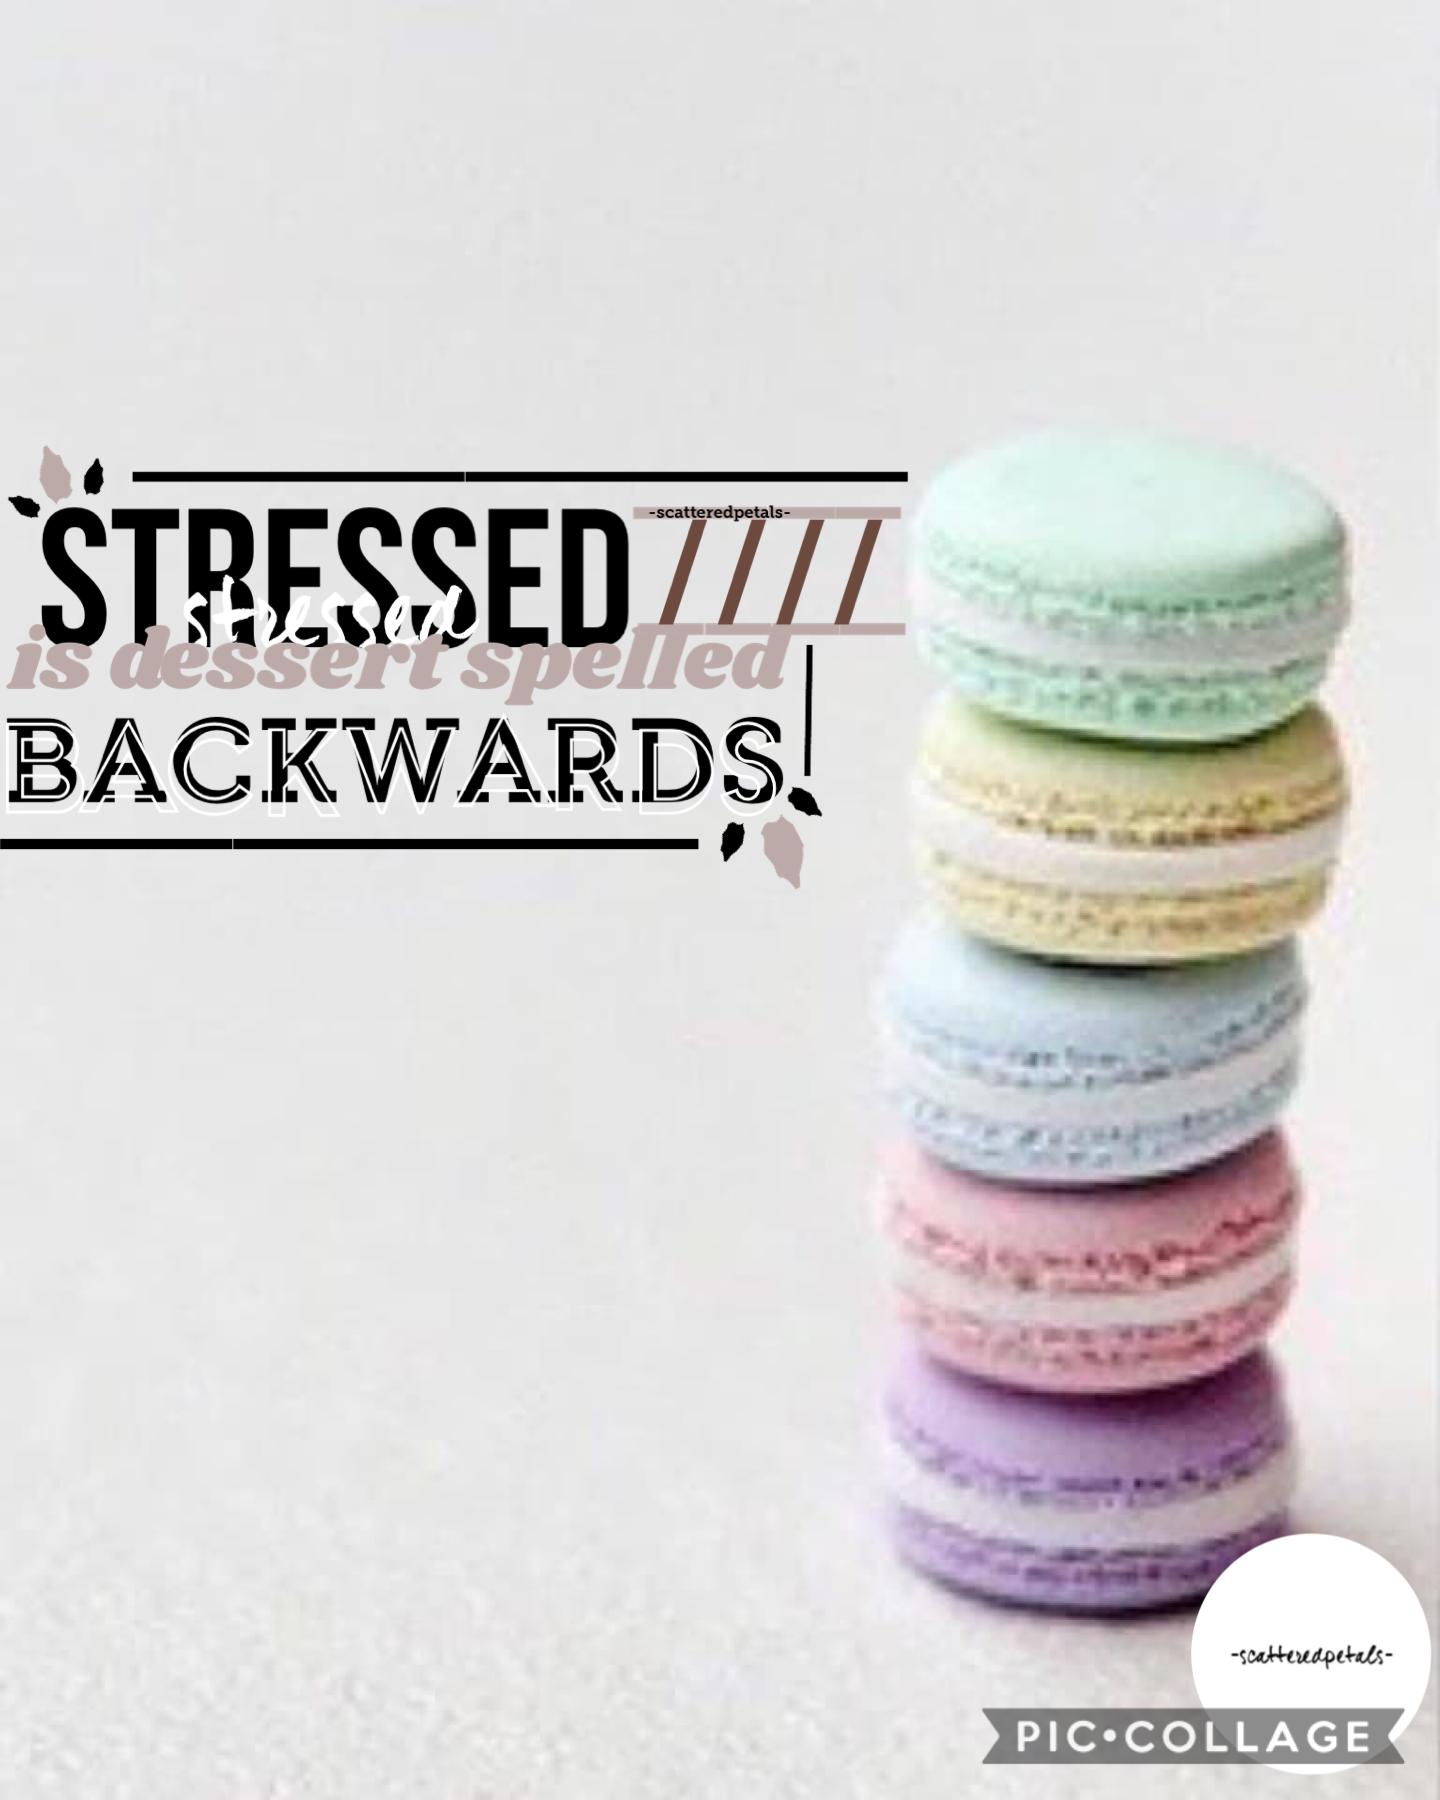 Tap
What do you think?? 
Quote: “Stressed is dessert spelled backwards” -Unknown 
only a few more weeks to enter my contest!!
6/17/20

Enjoy